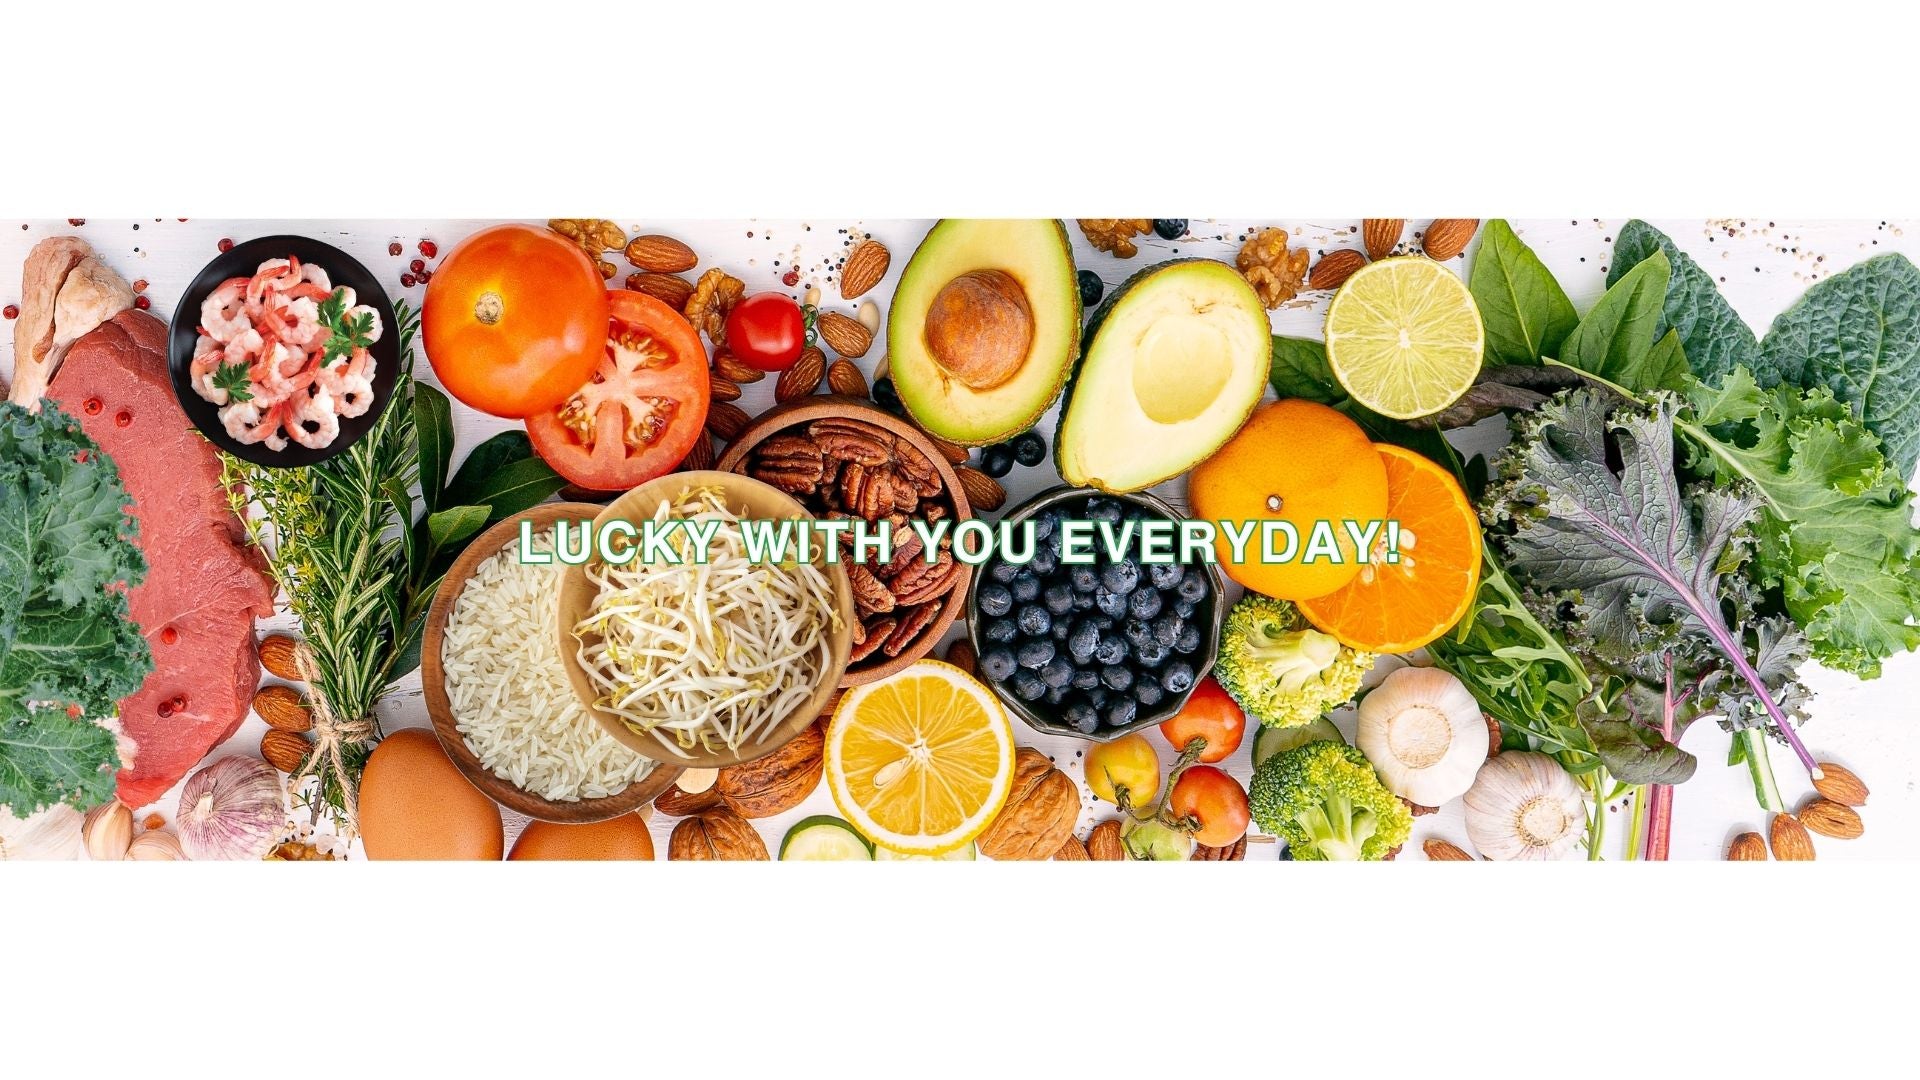 This is a Picture with Lucky Supply's Slogan. "Lucky With You Everyday" is the Slogan, In the picture it shows A lot different kind of Vegetables which presenting our supply business